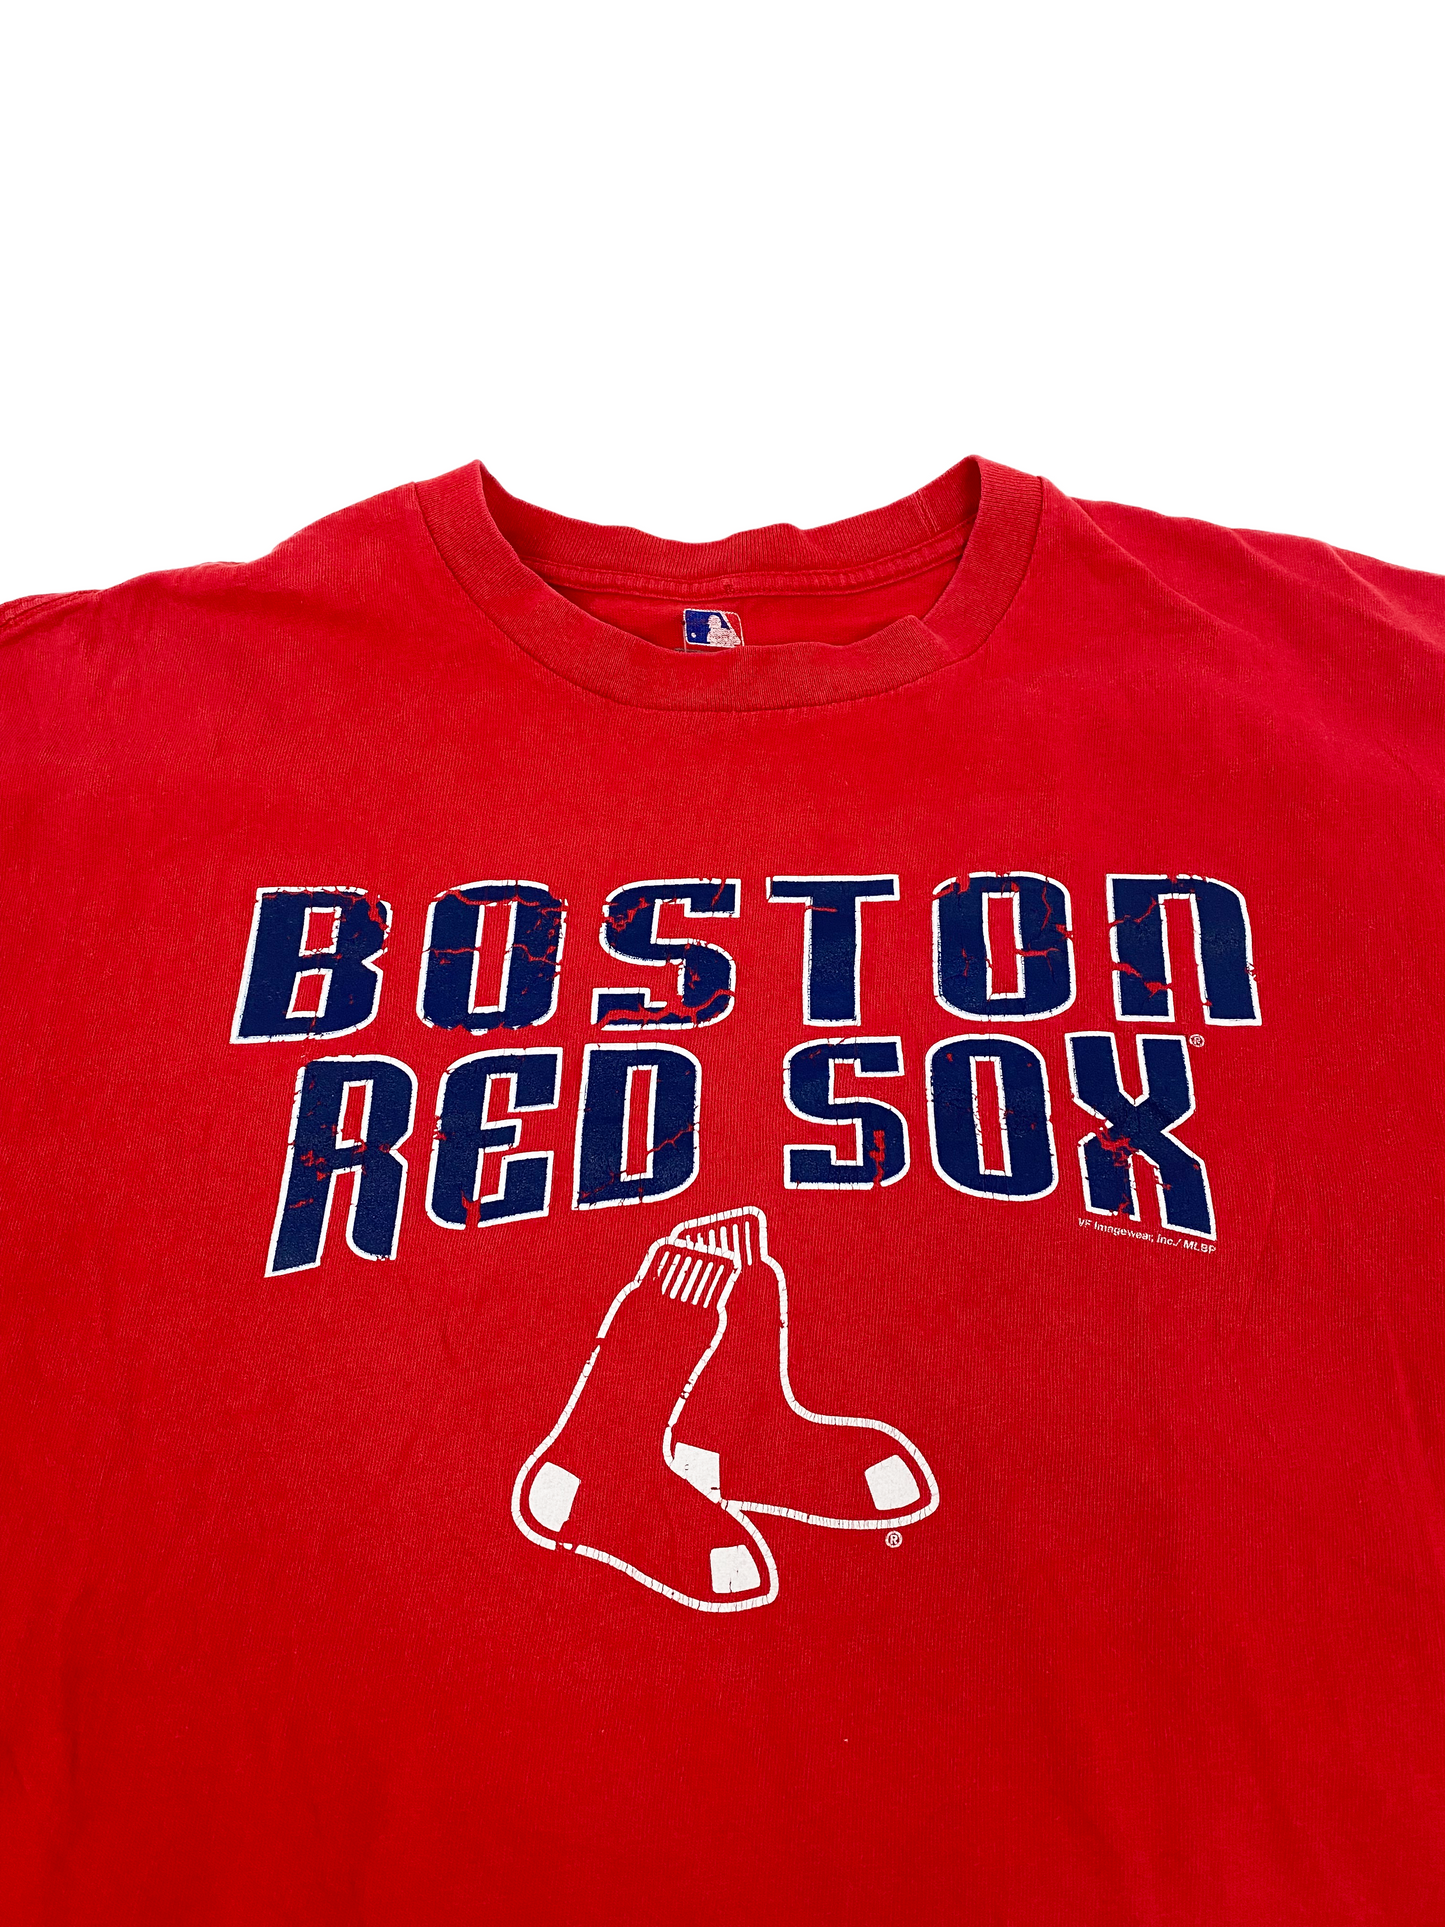 Boston Red Sox Red T-Shirt